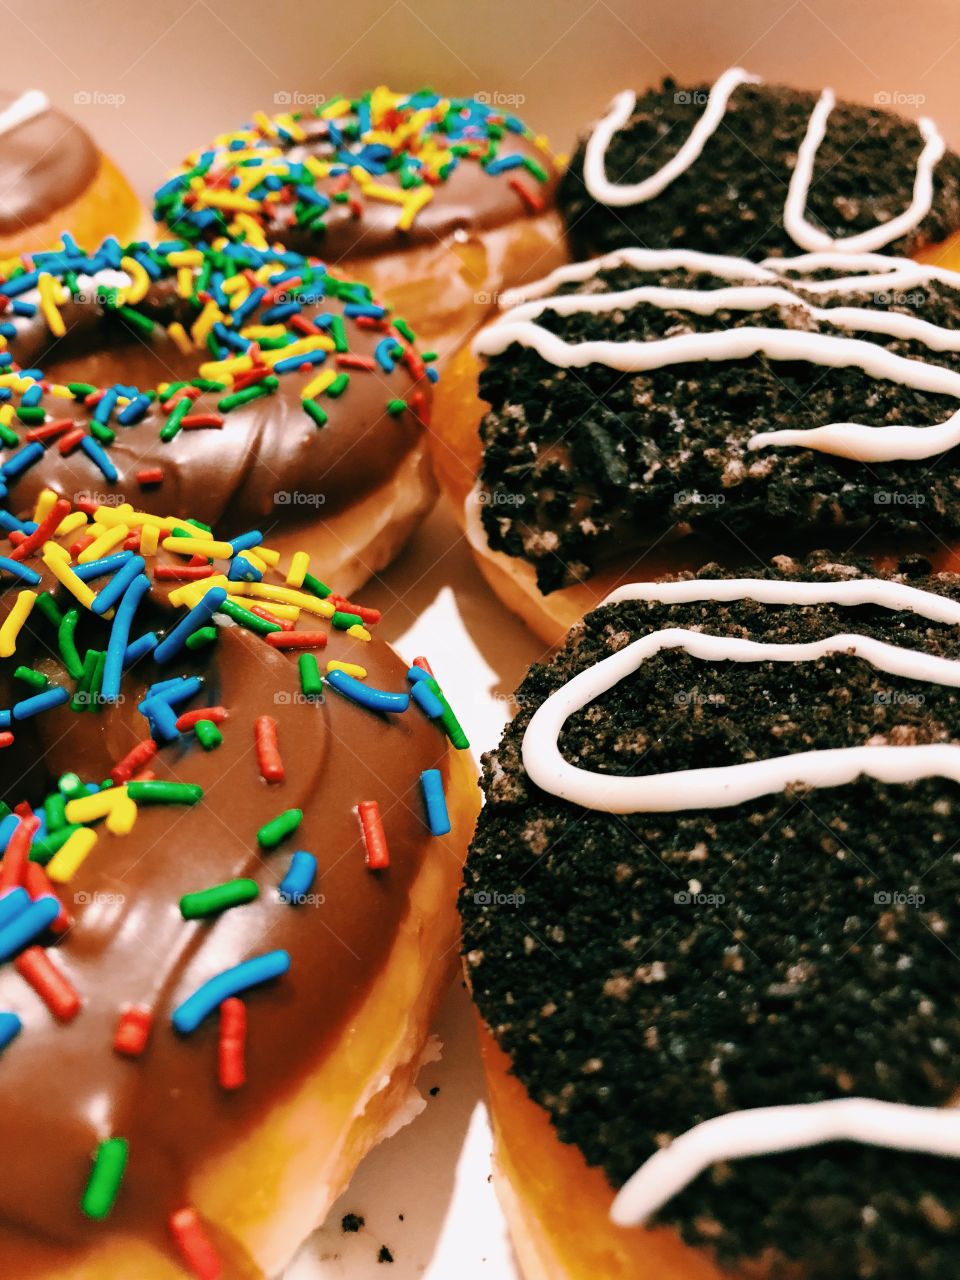 Ooey gooey, chocolatey, delicious, rich, creamy, moist, flavorful donuts from Krispy Kreme Doughnuts. Perfect late night mouth watering snacks. 